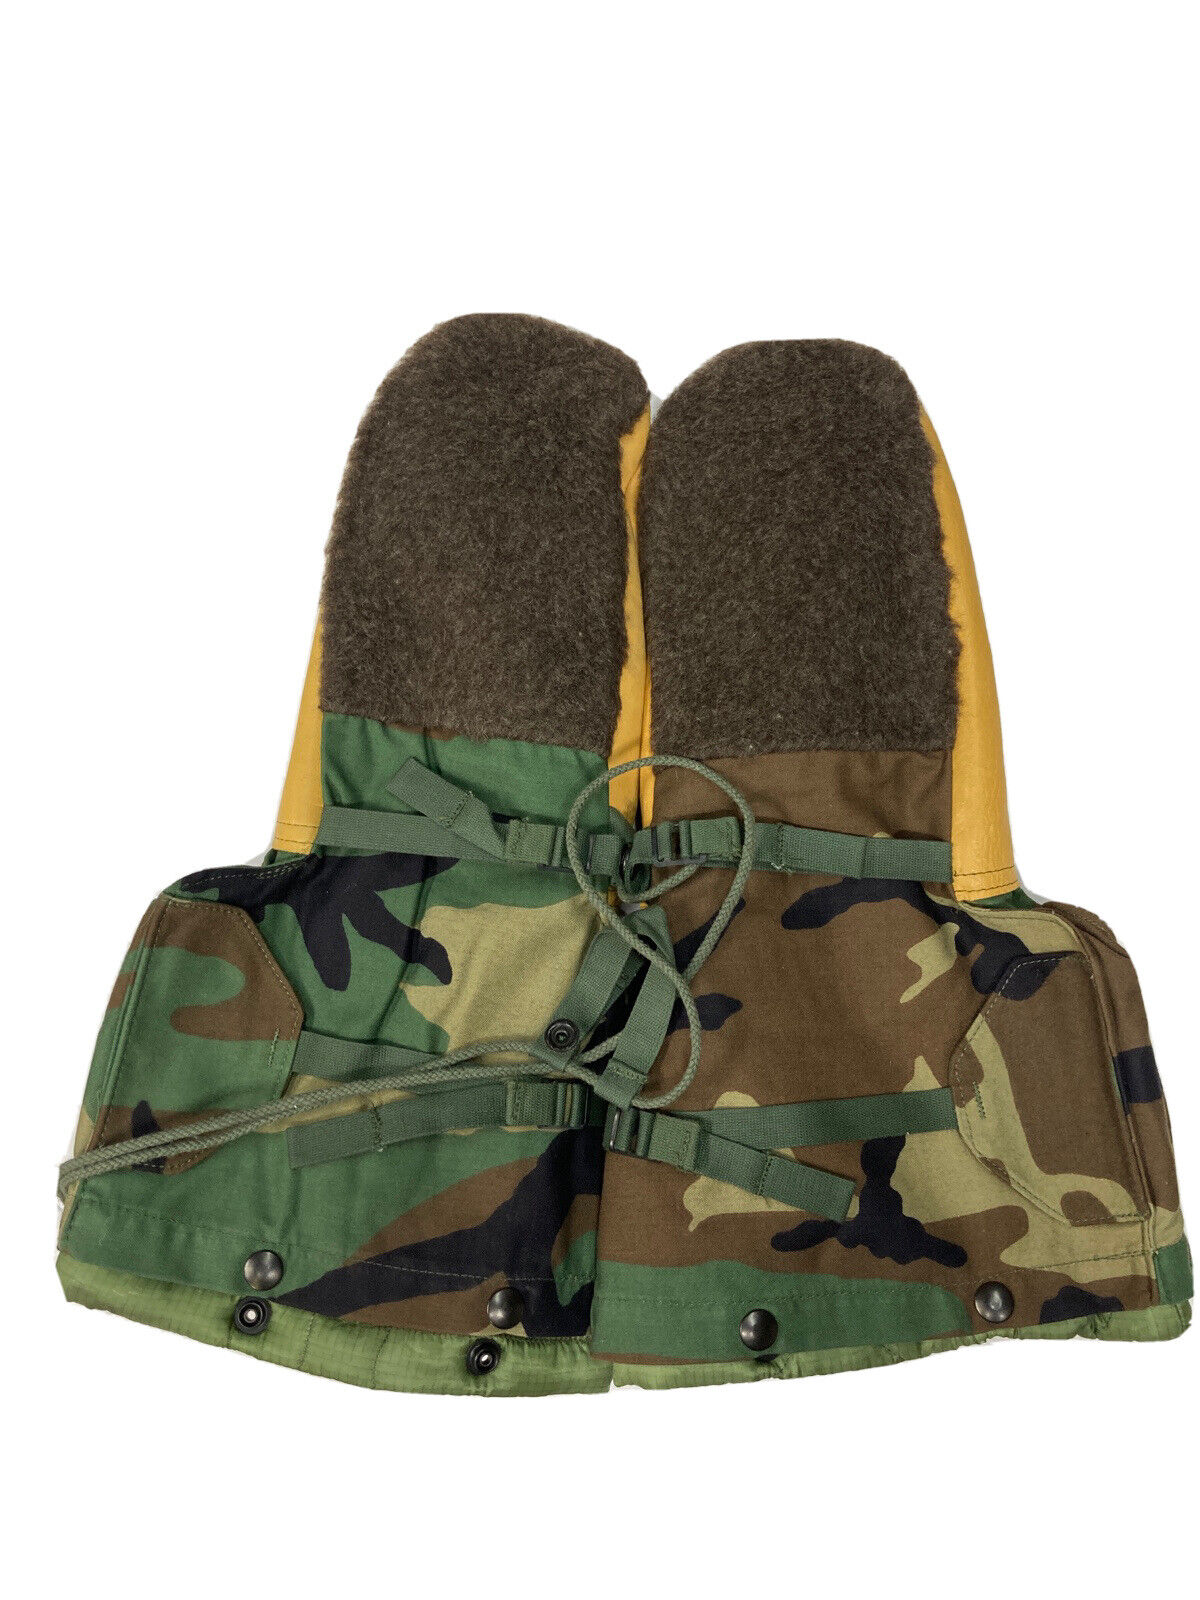 GI Mittens Glove ECW Extreme Cold Weather Army Military Camo Arctic ECWCS Small